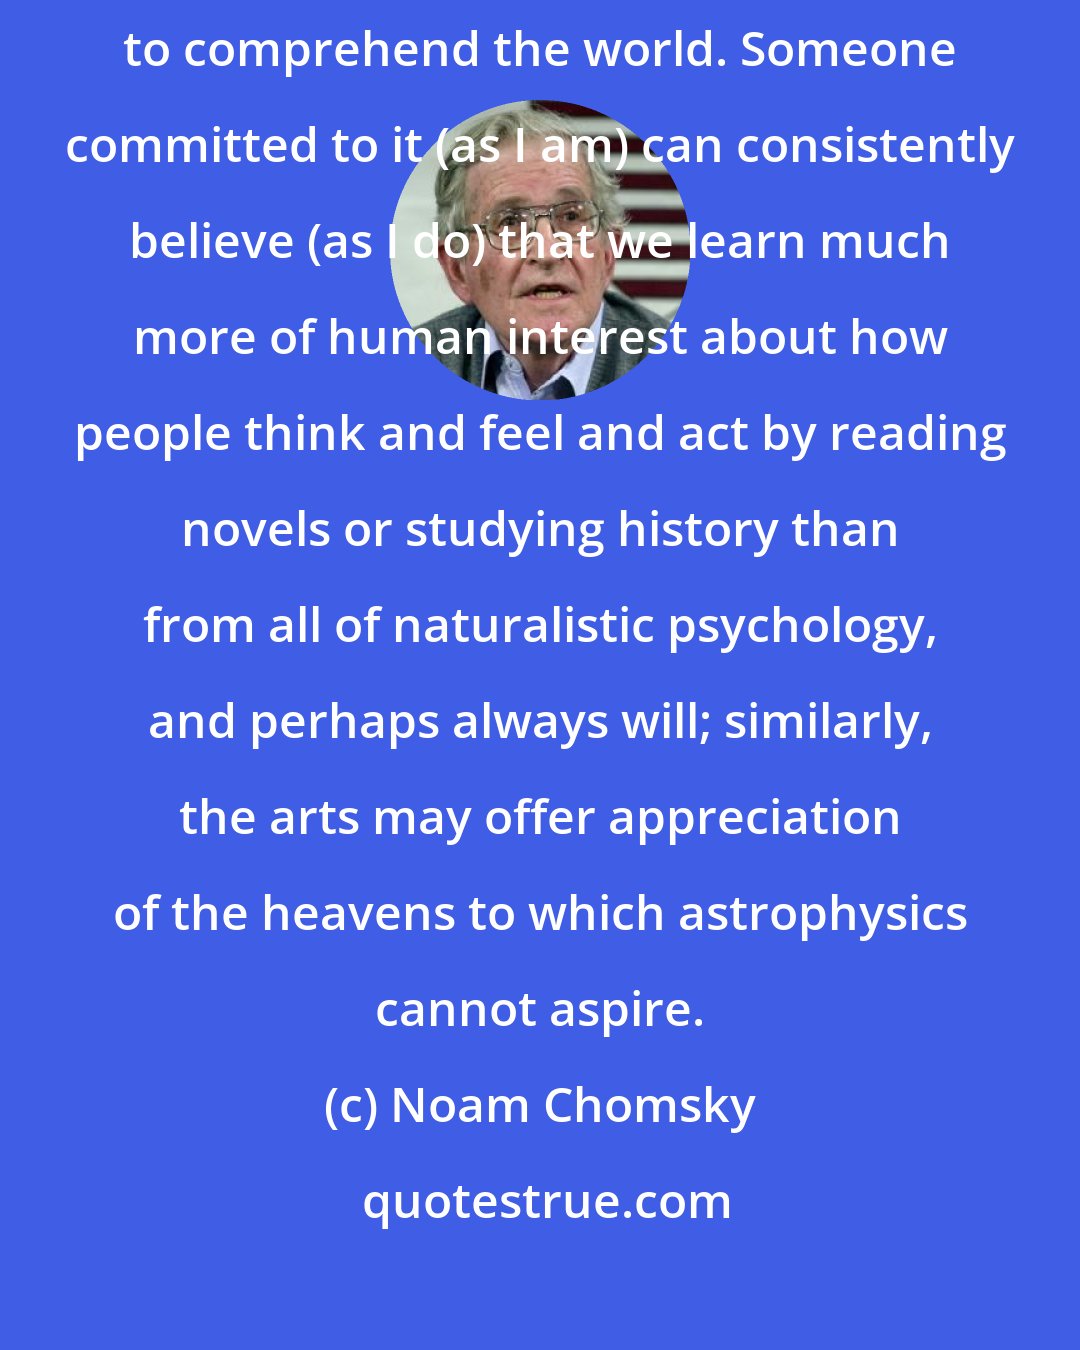 Noam Chomsky: Plainly, such an approach does not exclude other ways of trying to comprehend the world. Someone committed to it (as I am) can consistently believe (as I do) that we learn much more of human interest about how people think and feel and act by reading novels or studying history than from all of naturalistic psychology, and perhaps always will; similarly, the arts may offer appreciation of the heavens to which astrophysics cannot aspire.